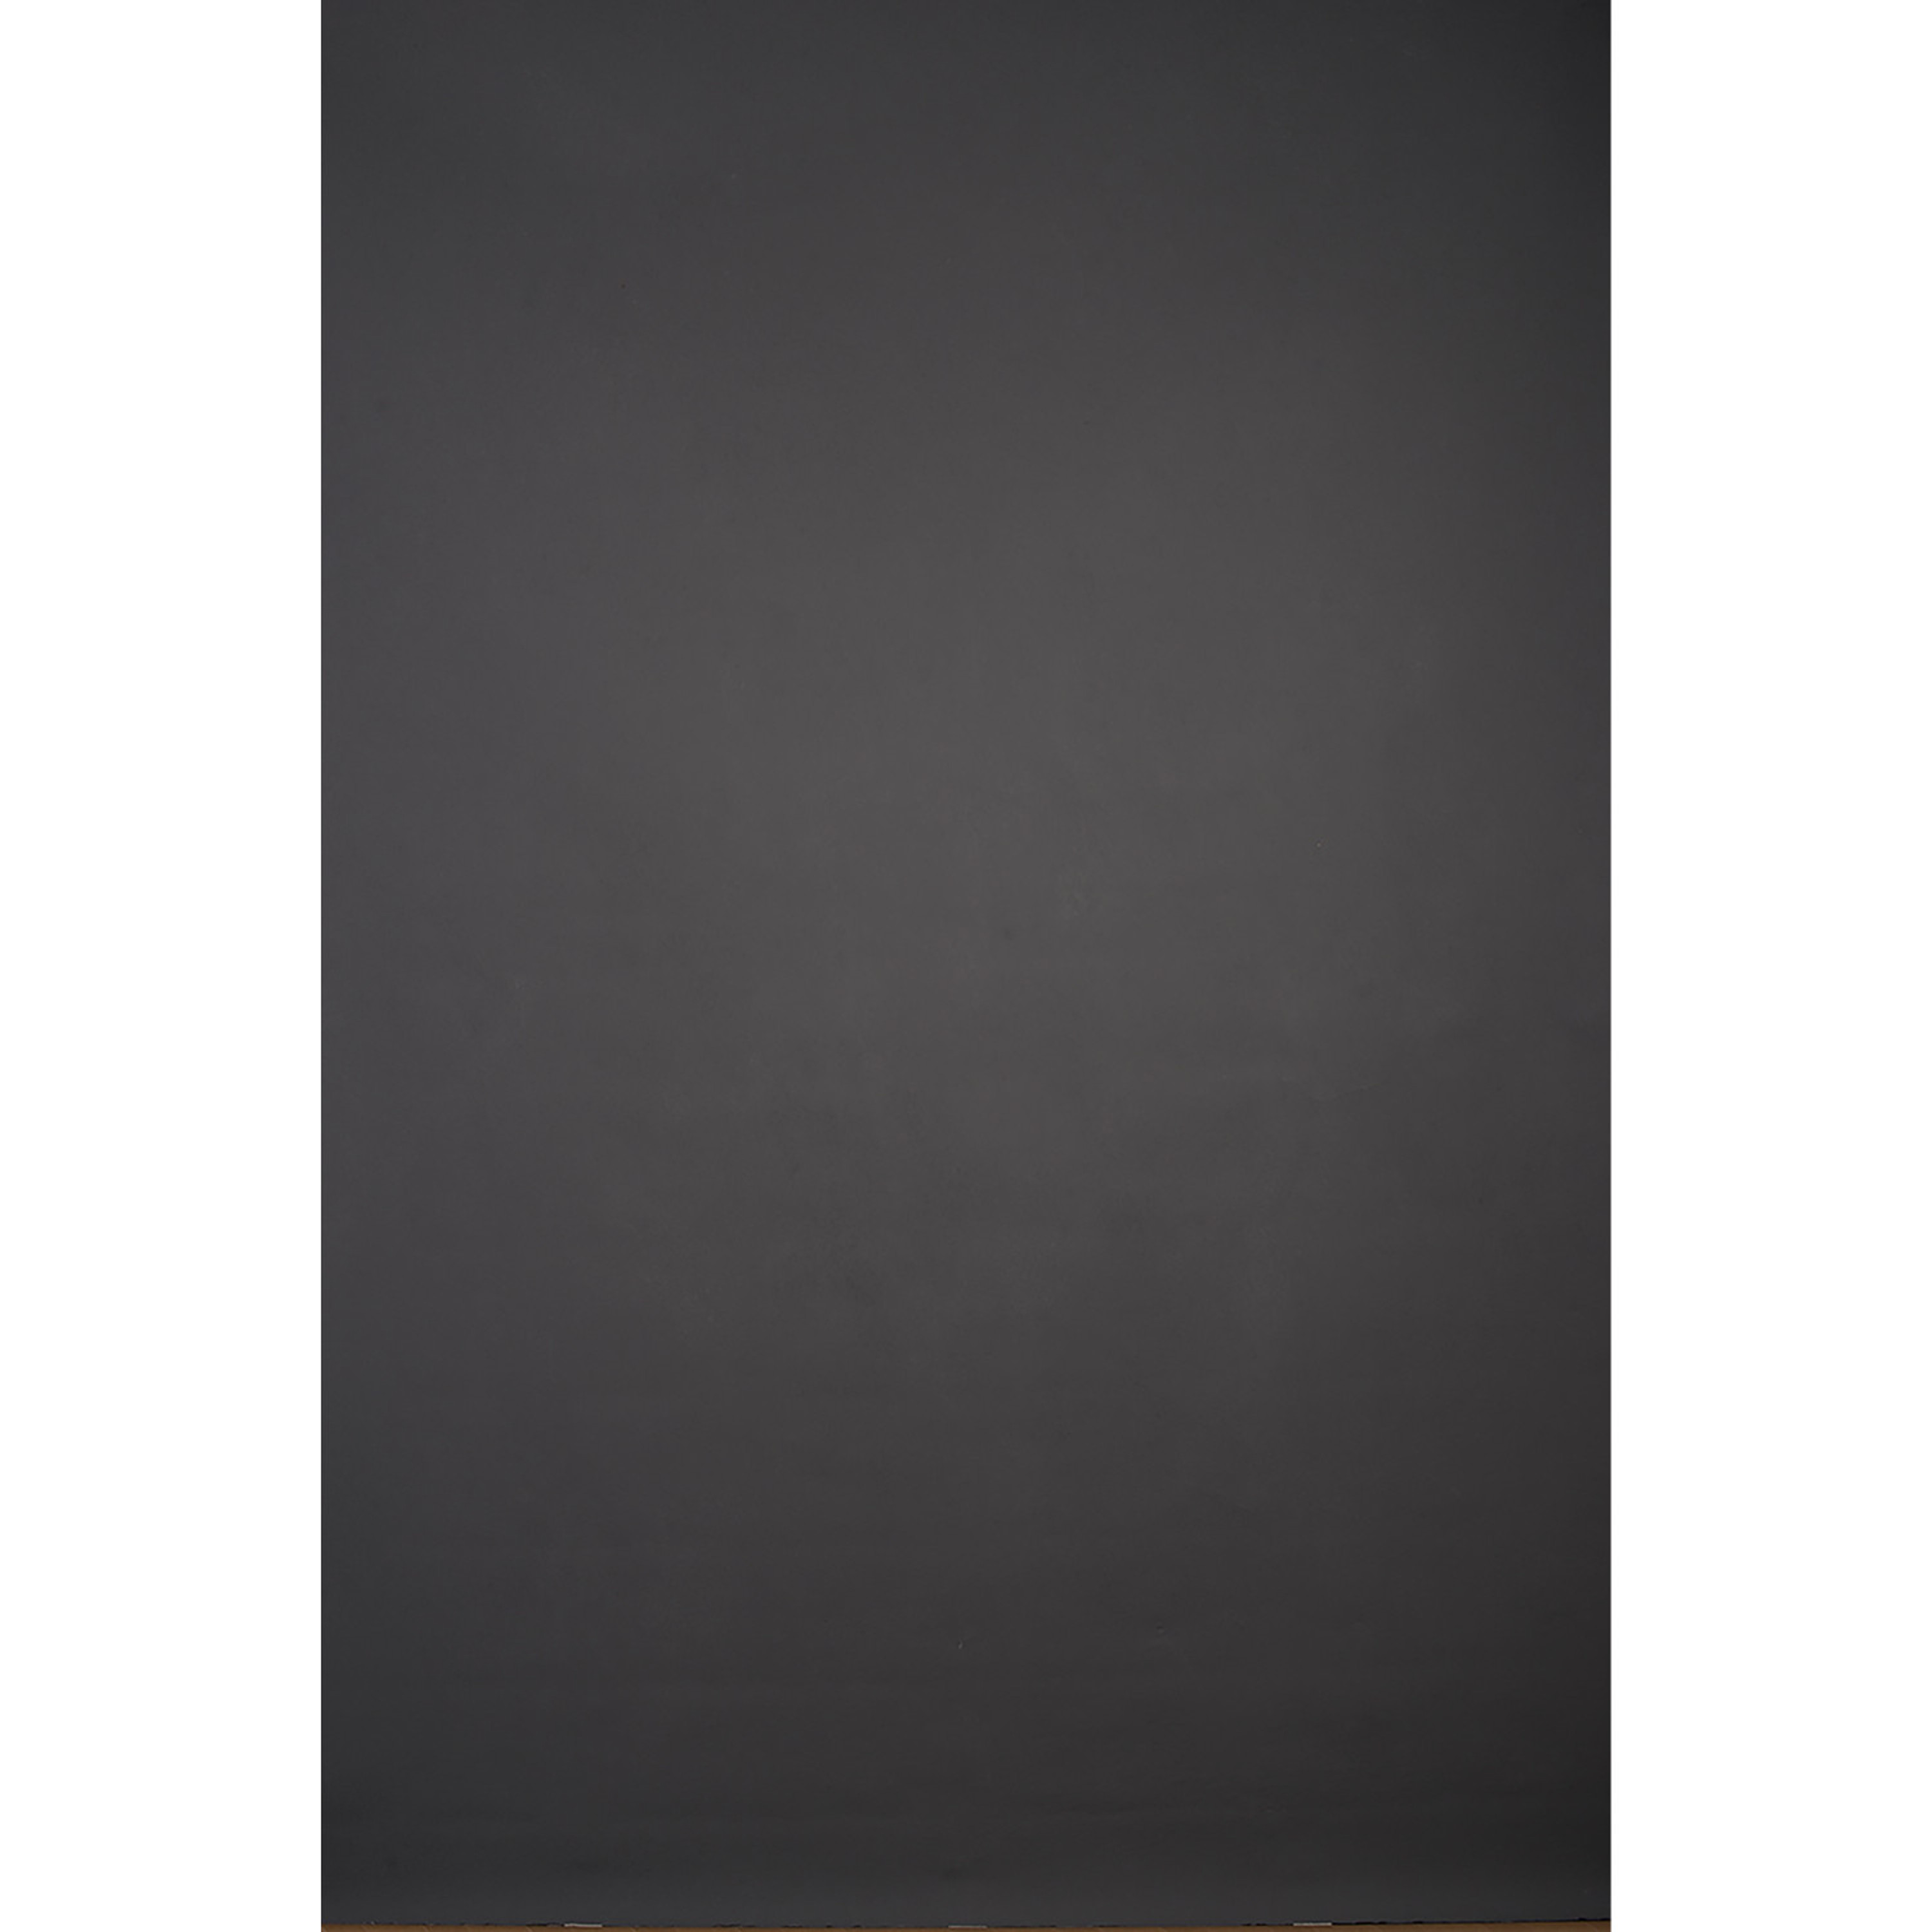 Gravity Backdrops Mid Gray Low Texture M (SN: 10983)